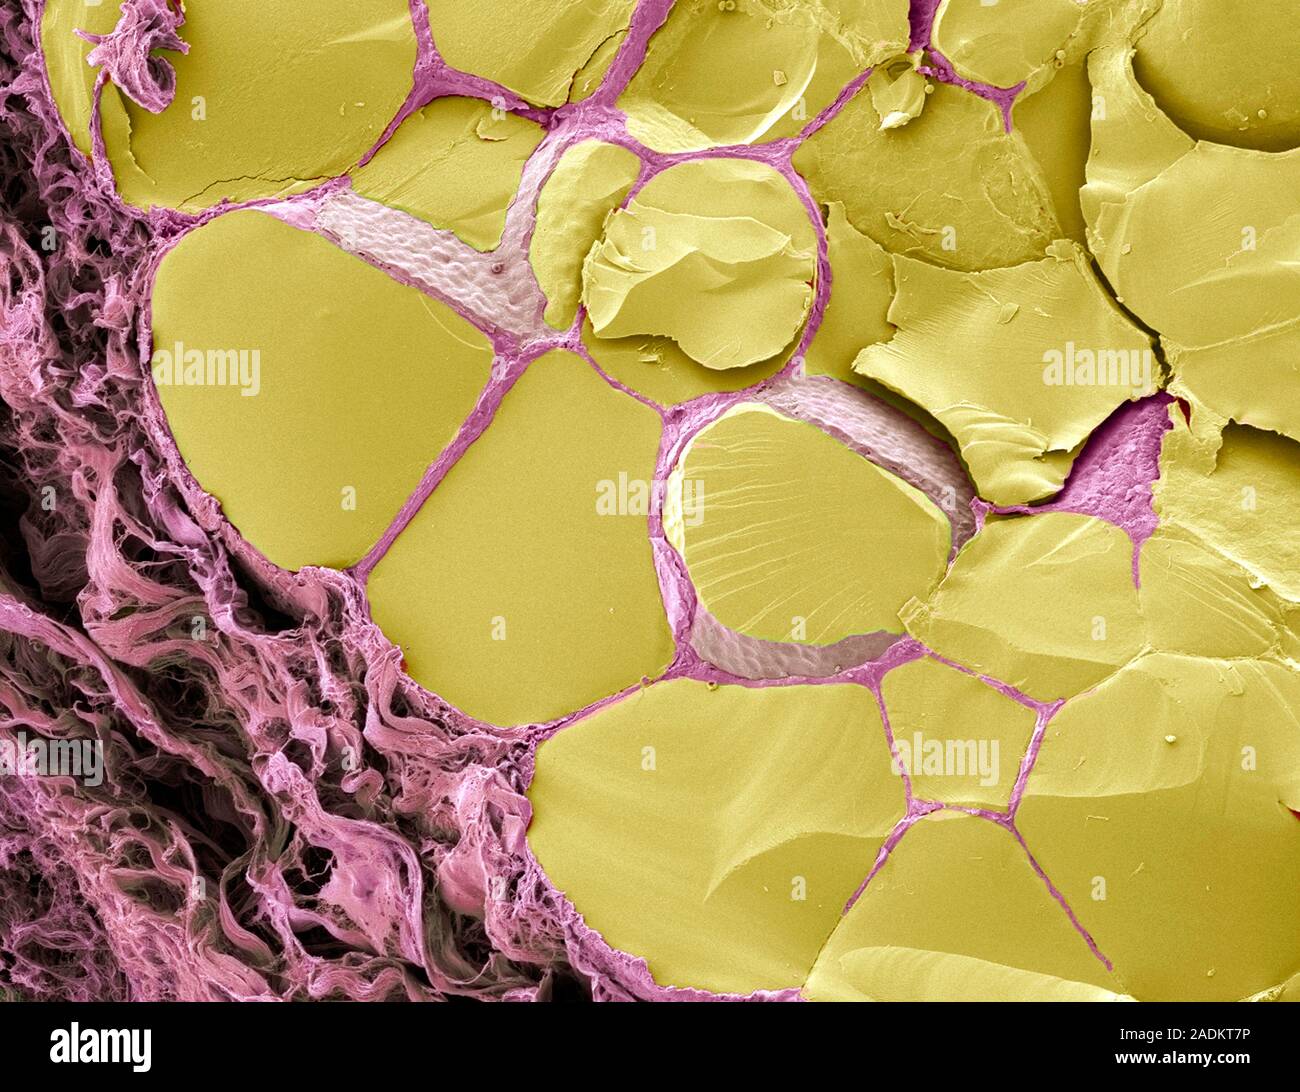 Thyroid gland. Coloured scanning electron micrograph (SEM) of a fracture through the thyroid gland revealing several follicles (yellow). Between the f Stock Photo